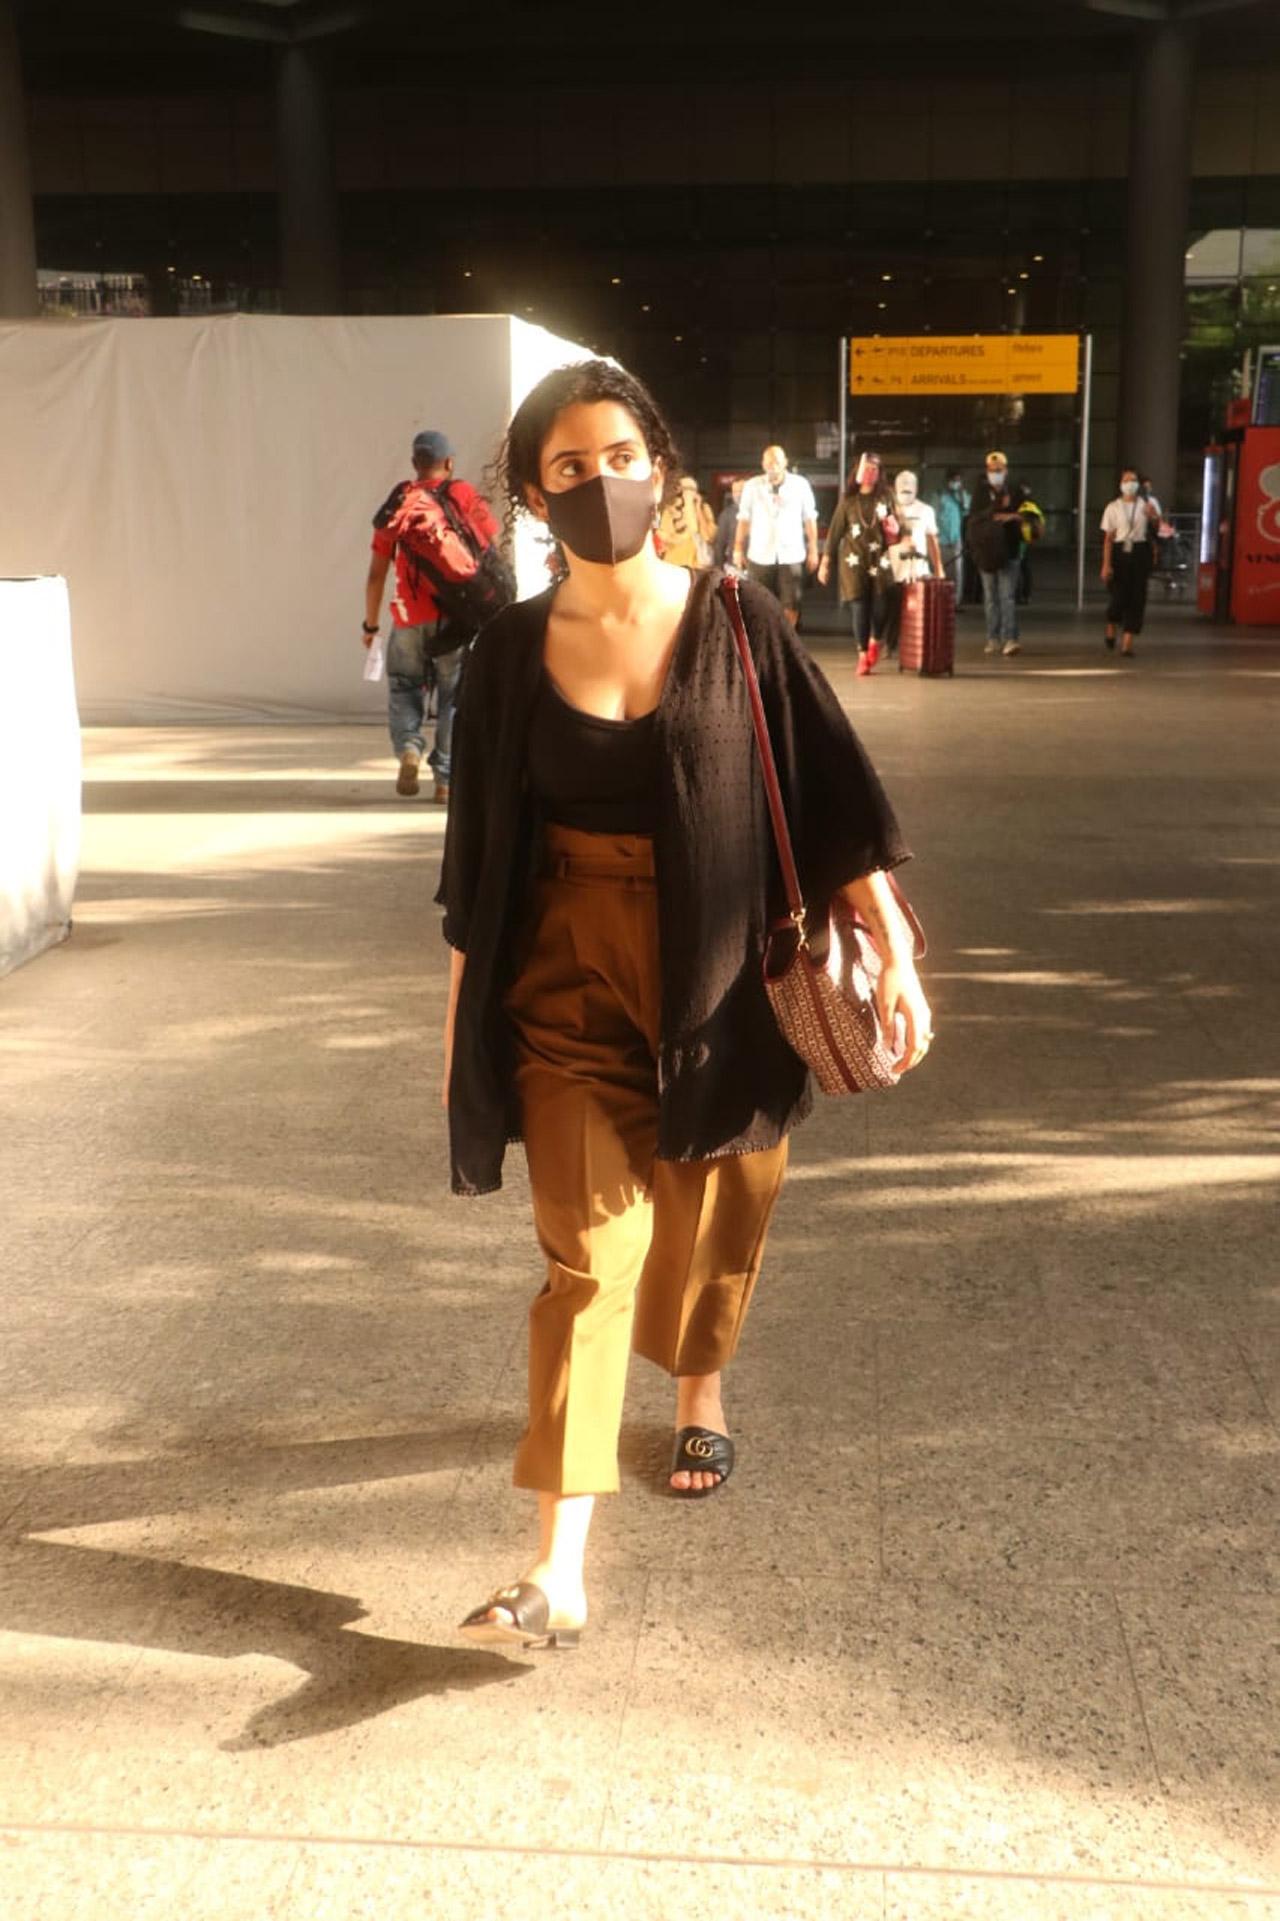 Sanya Malhotra is on cloud nine, as the actress is being lauded for her work in the recently released Netflix film Pagglait. The actress, however, did not seem to be in the mood to get clicked by the paparazzi when spotted at Mumbai airport.